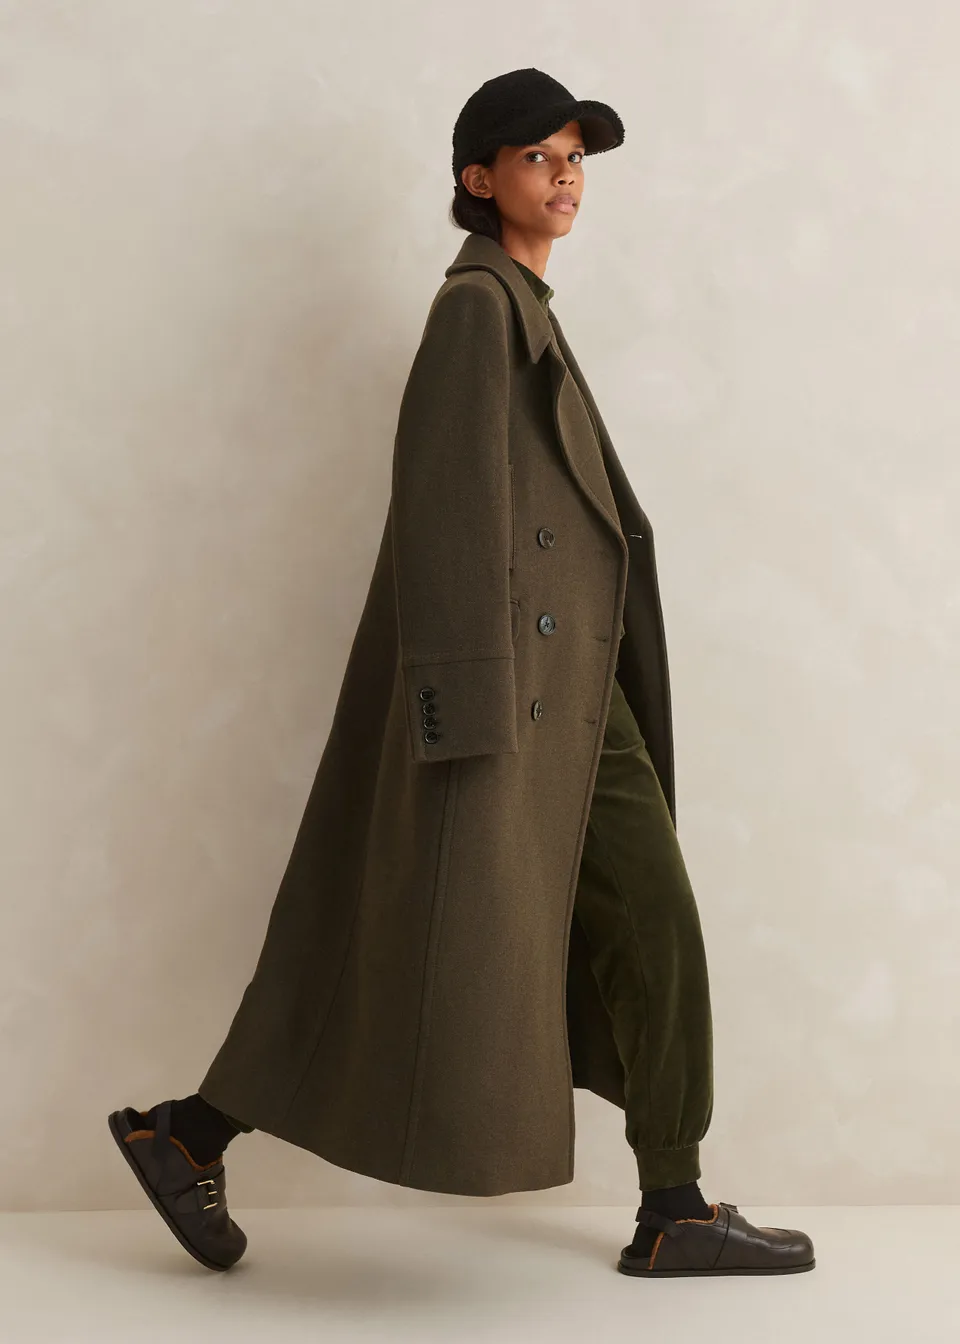 Trending Winter Coats 2023 2024 - Me + Em khaki longline silhouette coat in soft Italian wool-blend fabric cement this coat in your AW wardrobe, playing as integral a role in your workwear rotation as your weekend one.